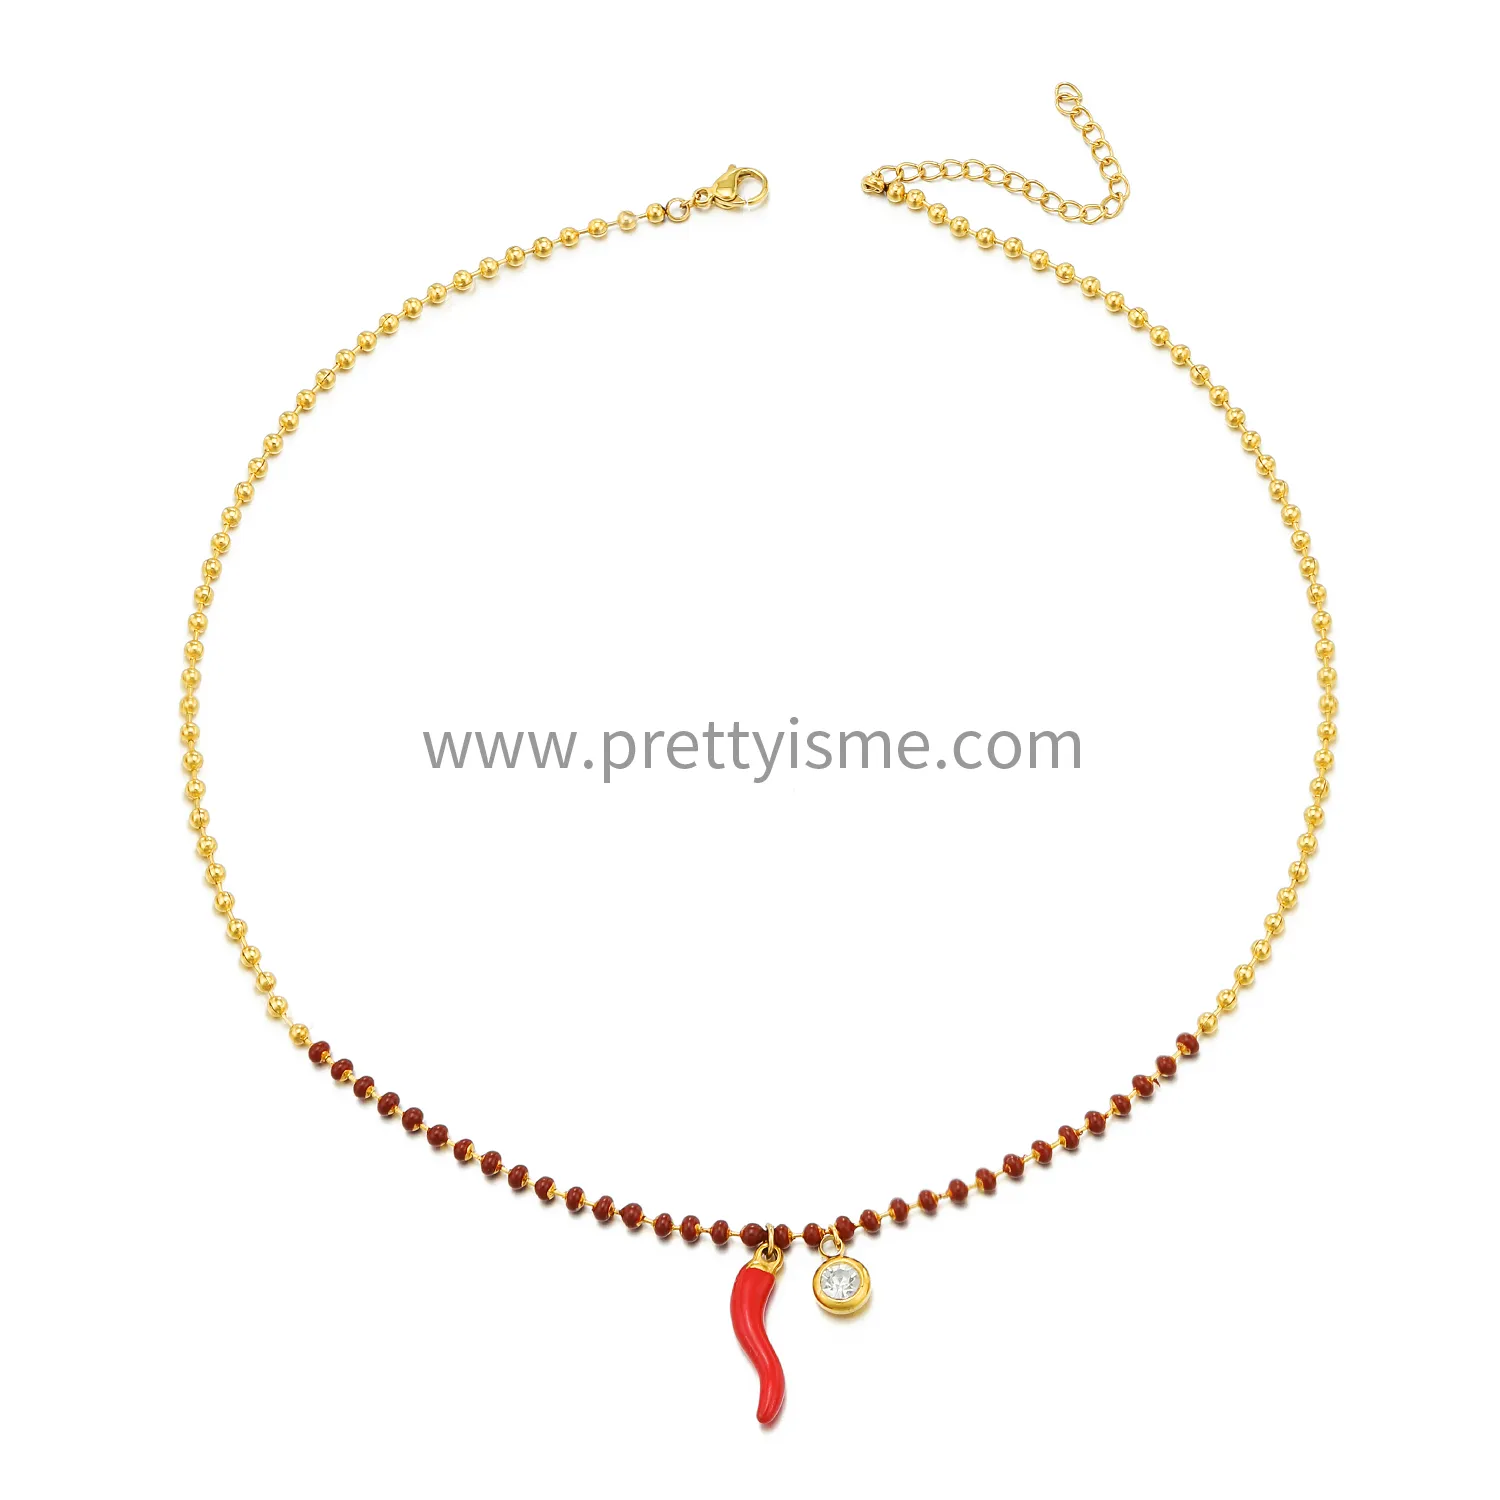 Small Pepper Pendant Stainless Steel Gold Plated 18K Necklace with Red Round Beads and Diamonds Delicate Necklace (5).webp